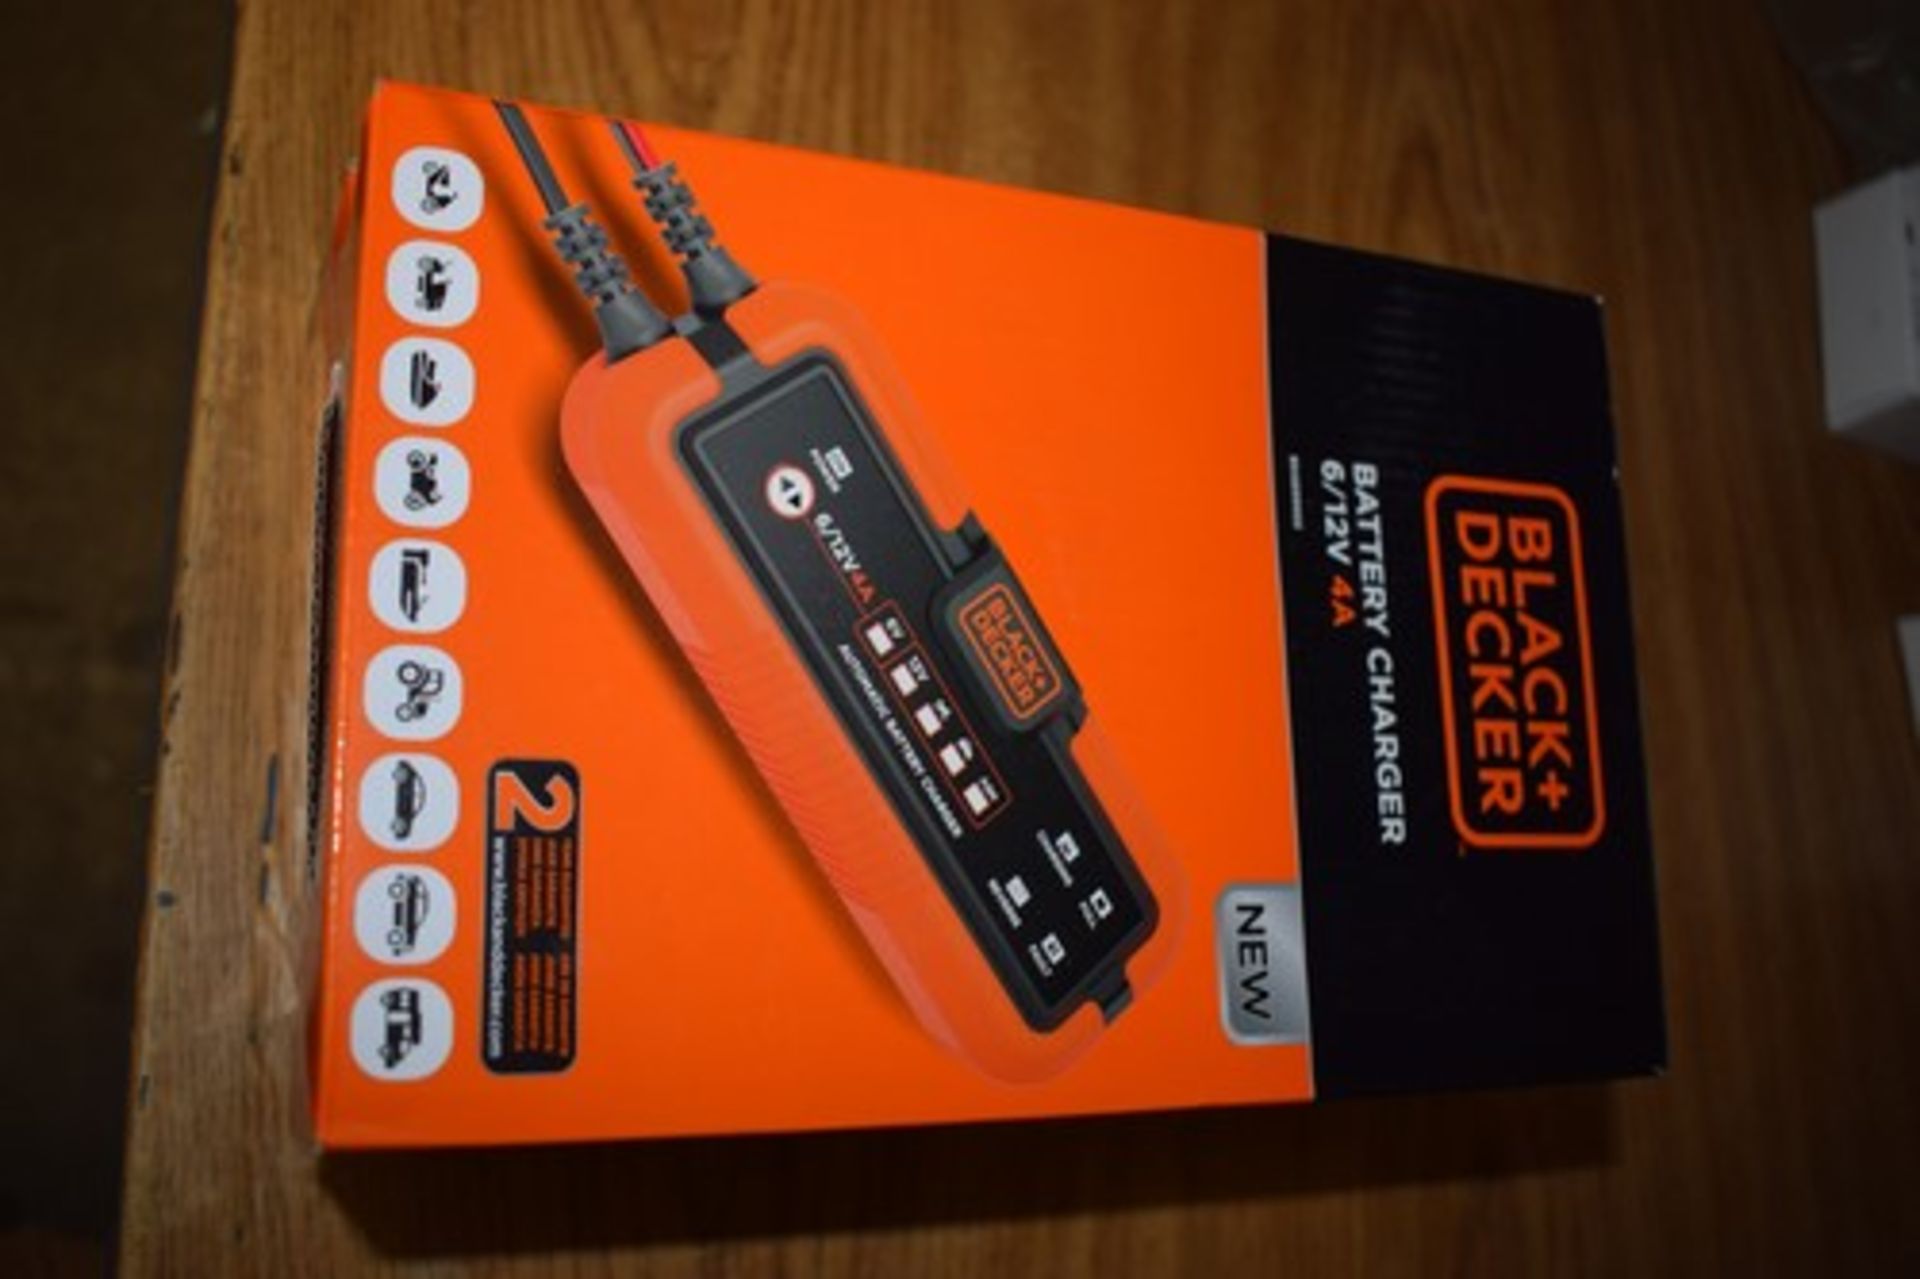 2 x Black & Decker 6/12v 5A battery chargers, EAN: 5425038531299 - new in box (ES16)